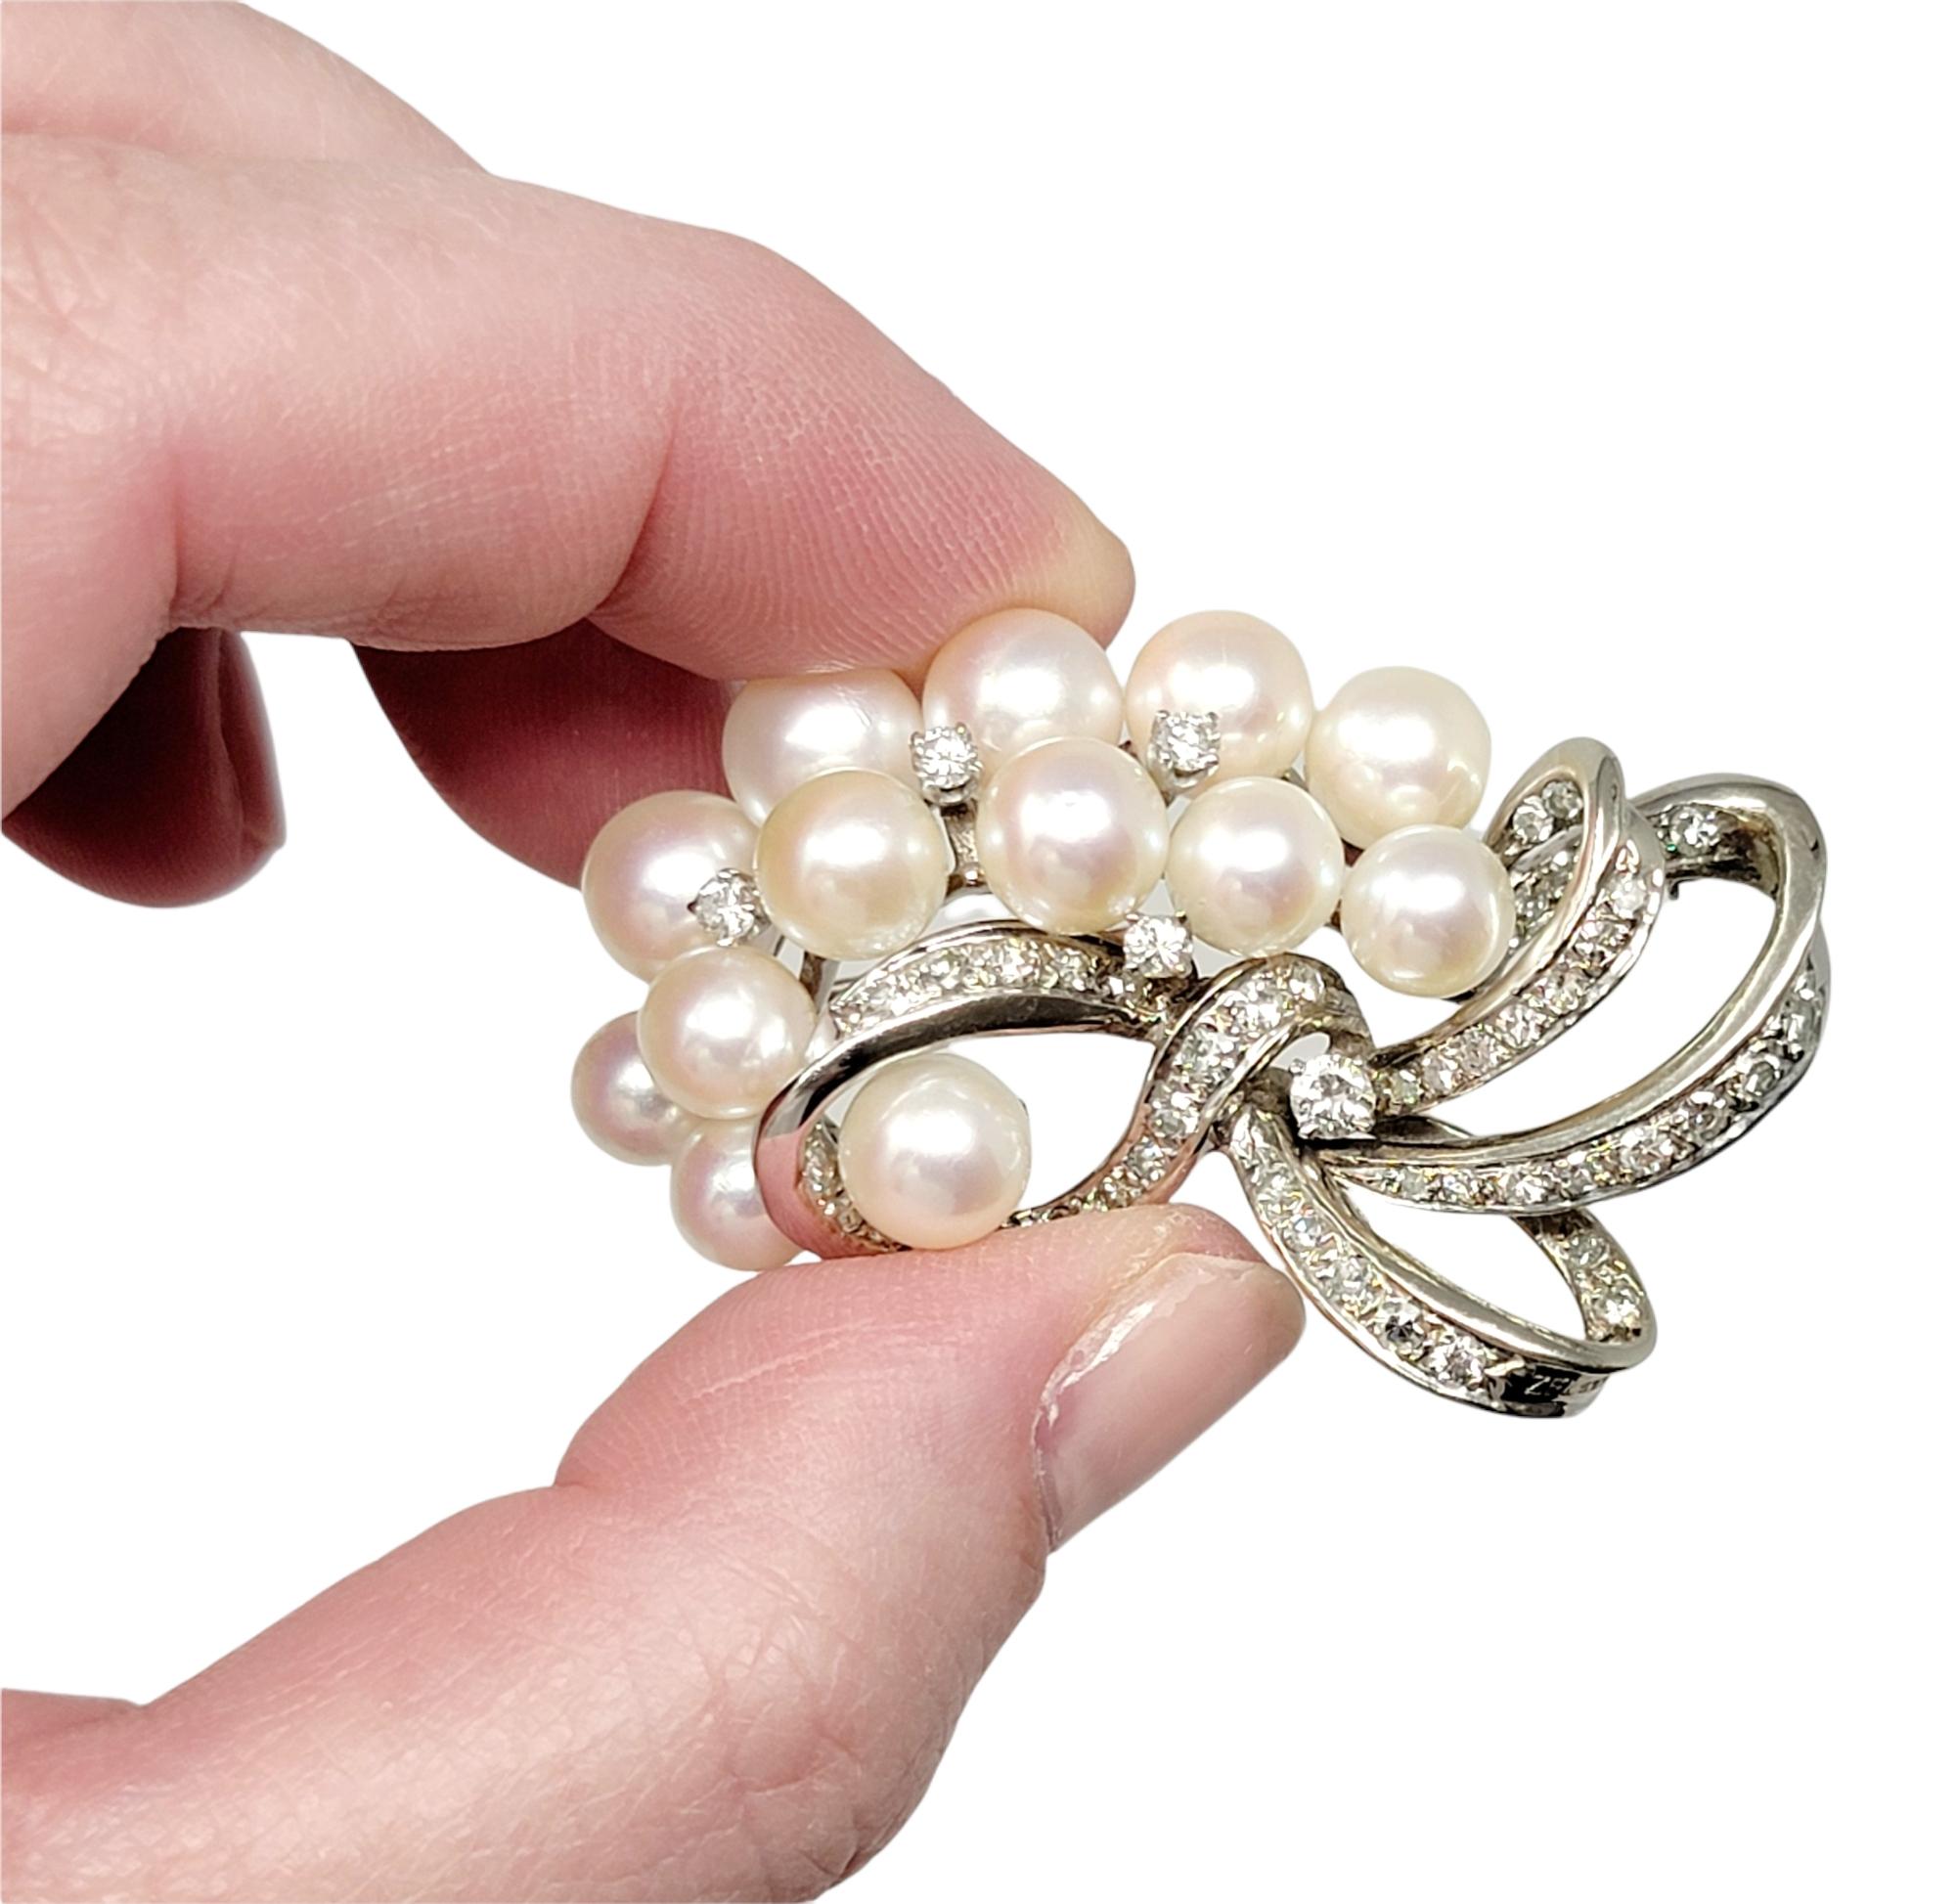 1.70 Carat Total Diamond and Cultured Pearl Ribbon Swirl Brooch 14 Karat Gold In Good Condition For Sale In Scottsdale, AZ